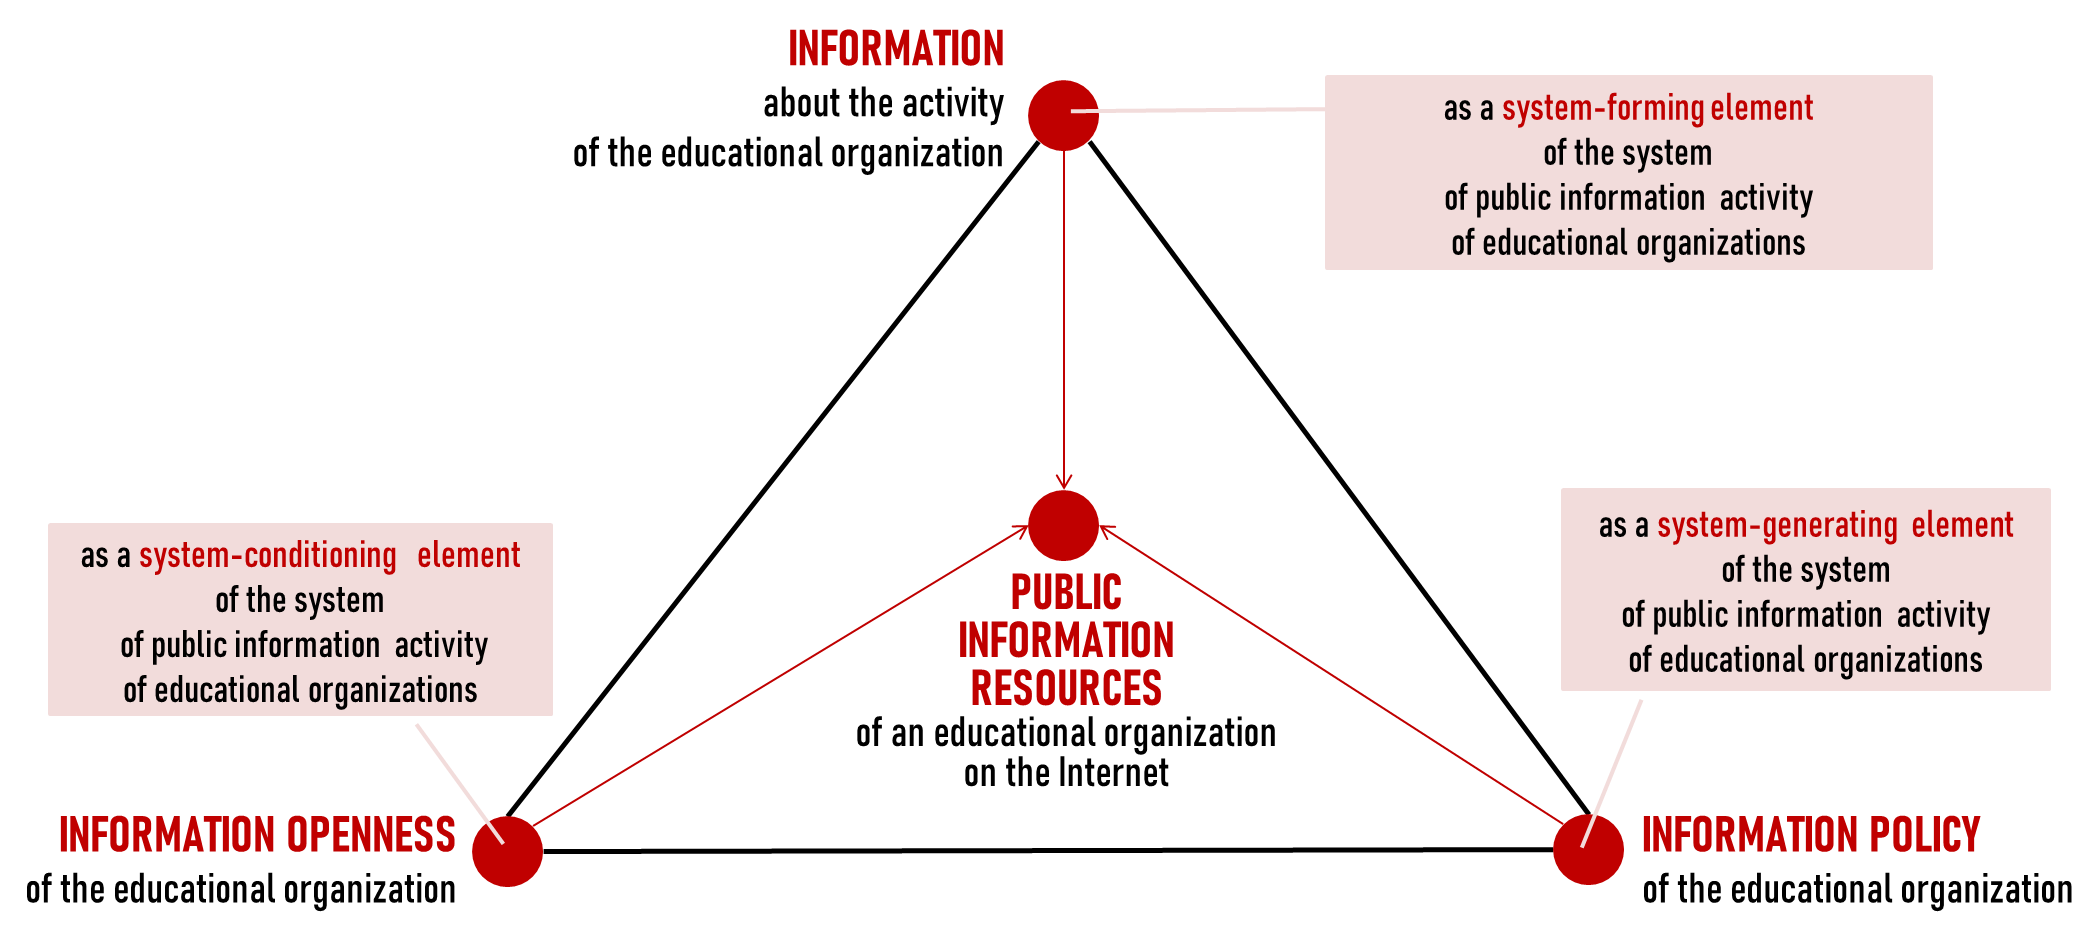 The original version of the realization of the hypothesis for the inclusion of information policy in the public information activities of educational institutions